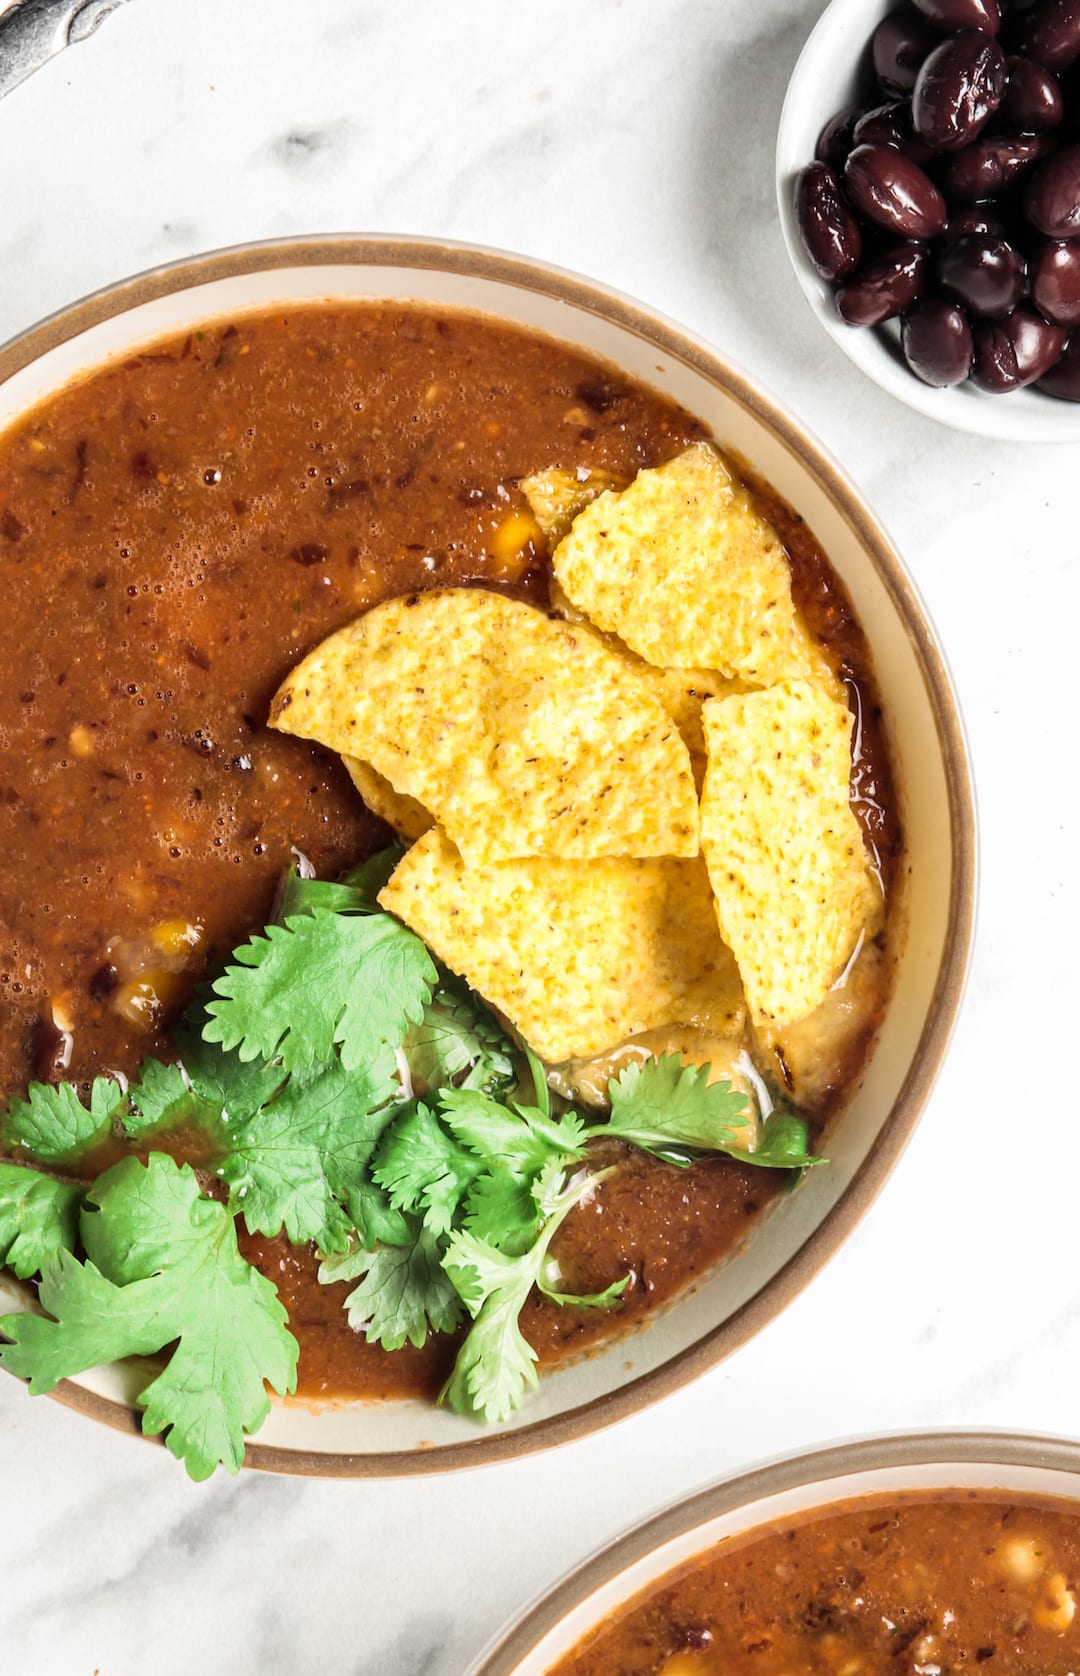 Easy Blender Vitamix Tortilla Soup with tortilla corn chips and cilantro